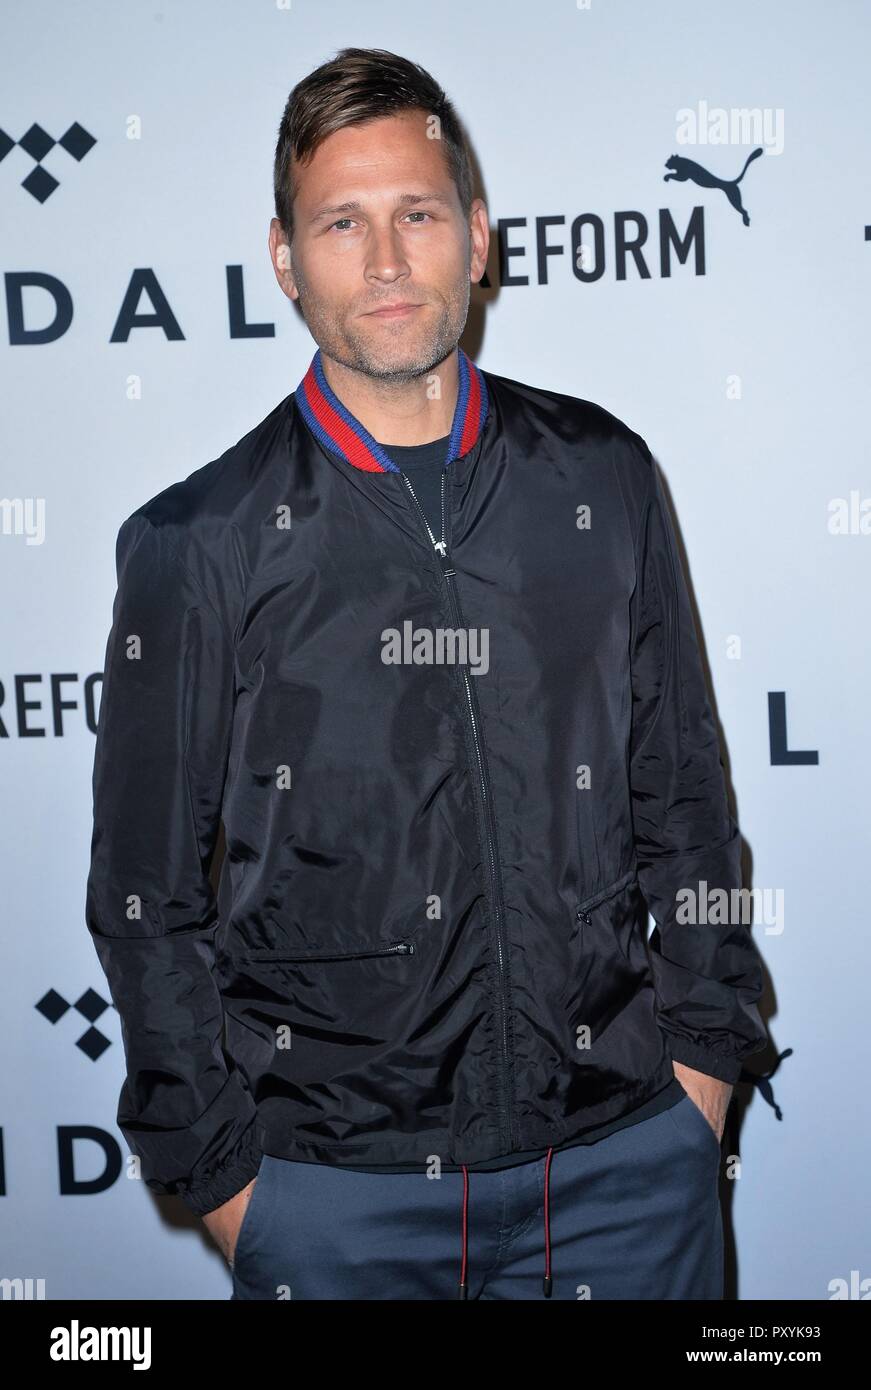 Brooklyn, NY, USA. 23rd Oct, 2018. Kaskade at arrivals for 4th Annual TIDAL X: Brooklyn Benefit Concert, Barclays Center, Brooklyn, NY October 23, 2018. Credit: Kristin Callahan/Everett Collection/Alamy Live News Stock Photo